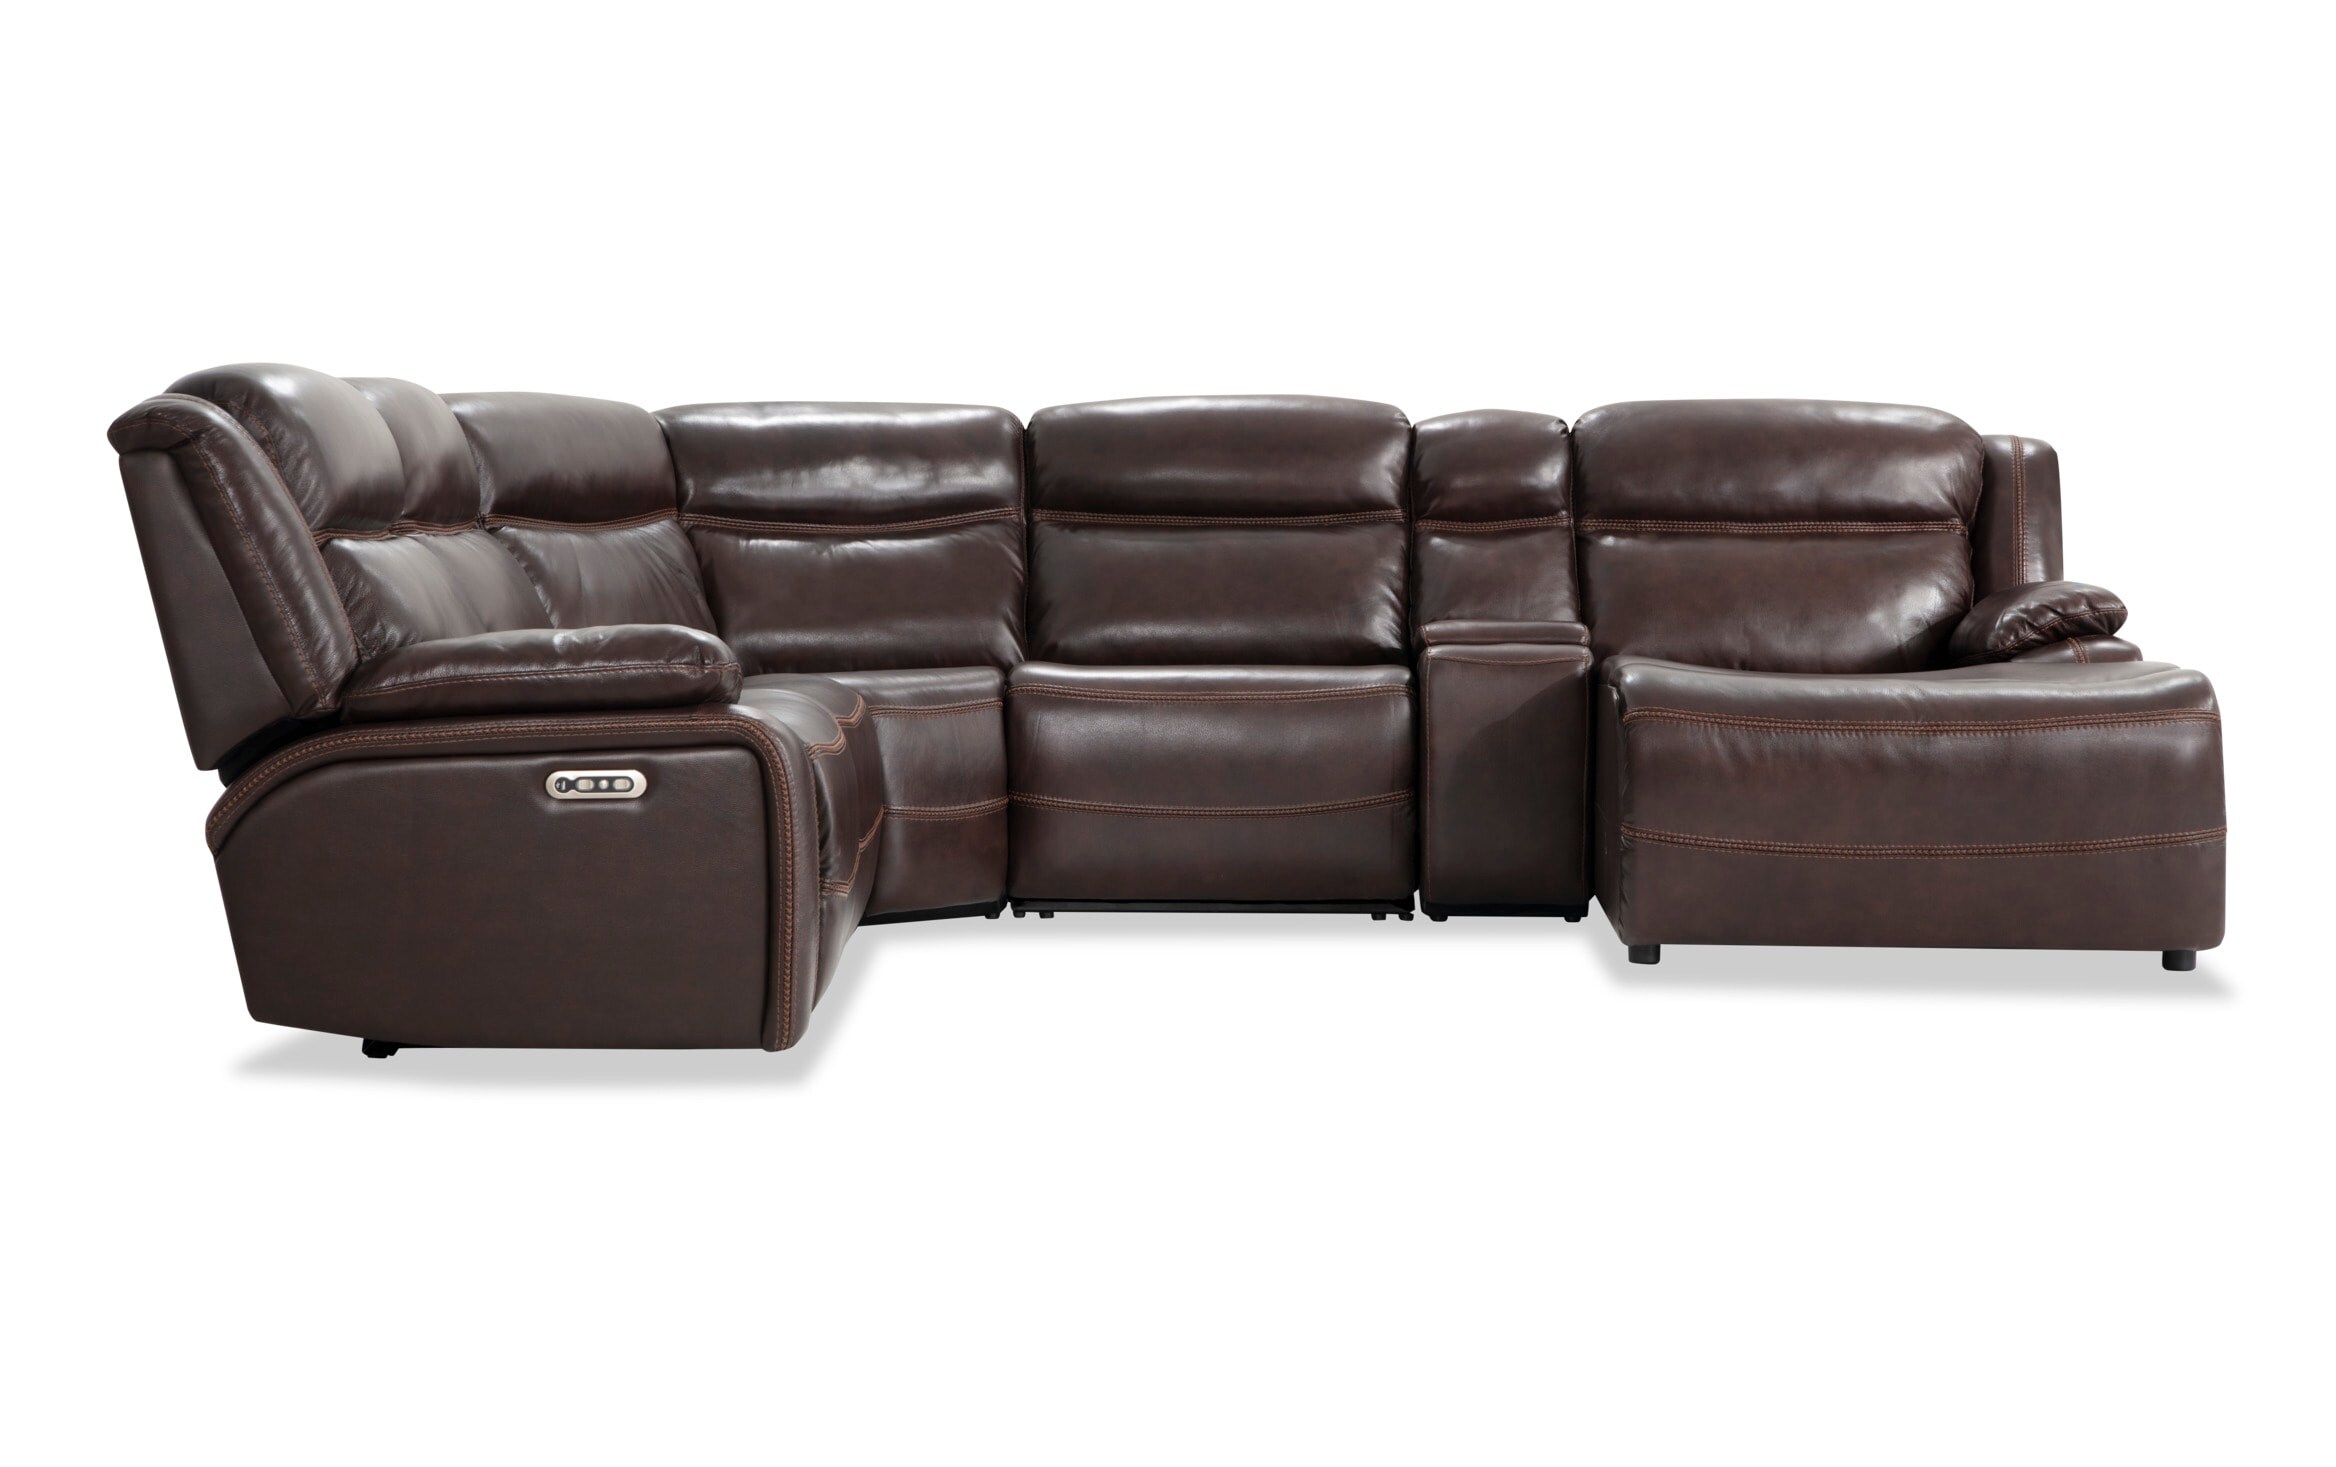 Trailblazer Brown Leather 6 Piece Power, Brown Leather Couch With Recliners